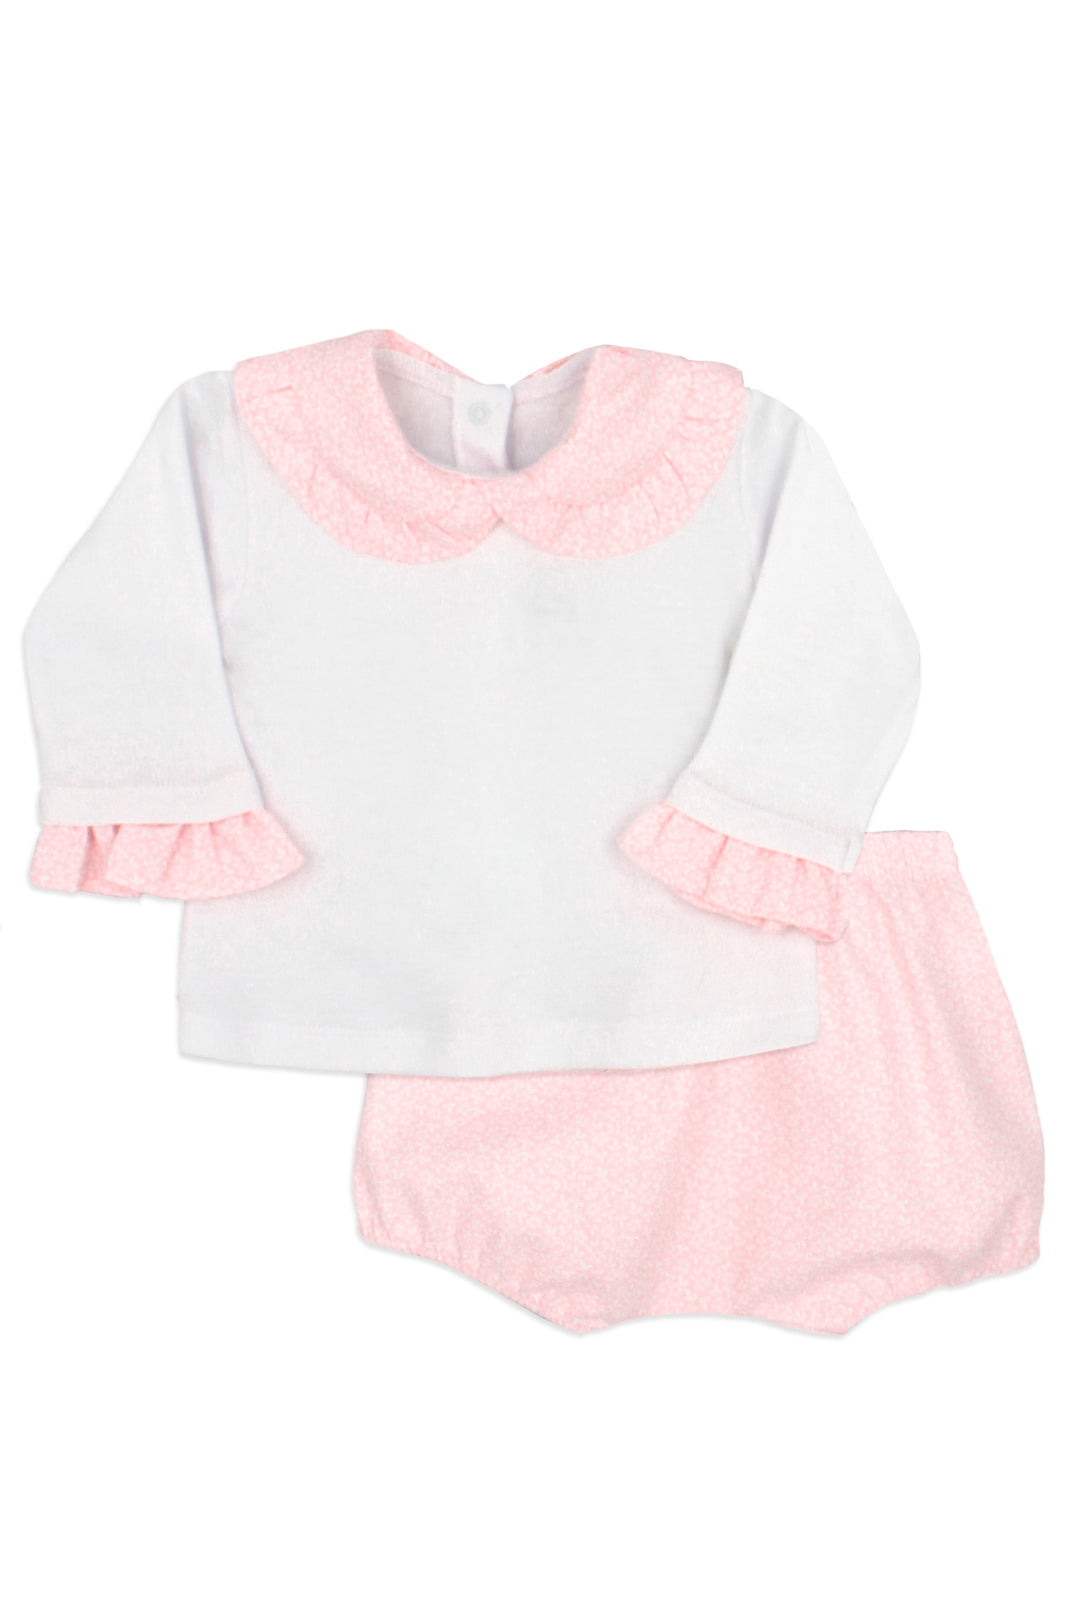 Rapife "Kaylee" Pink Floral Blouse & Bloomers | Millie and John